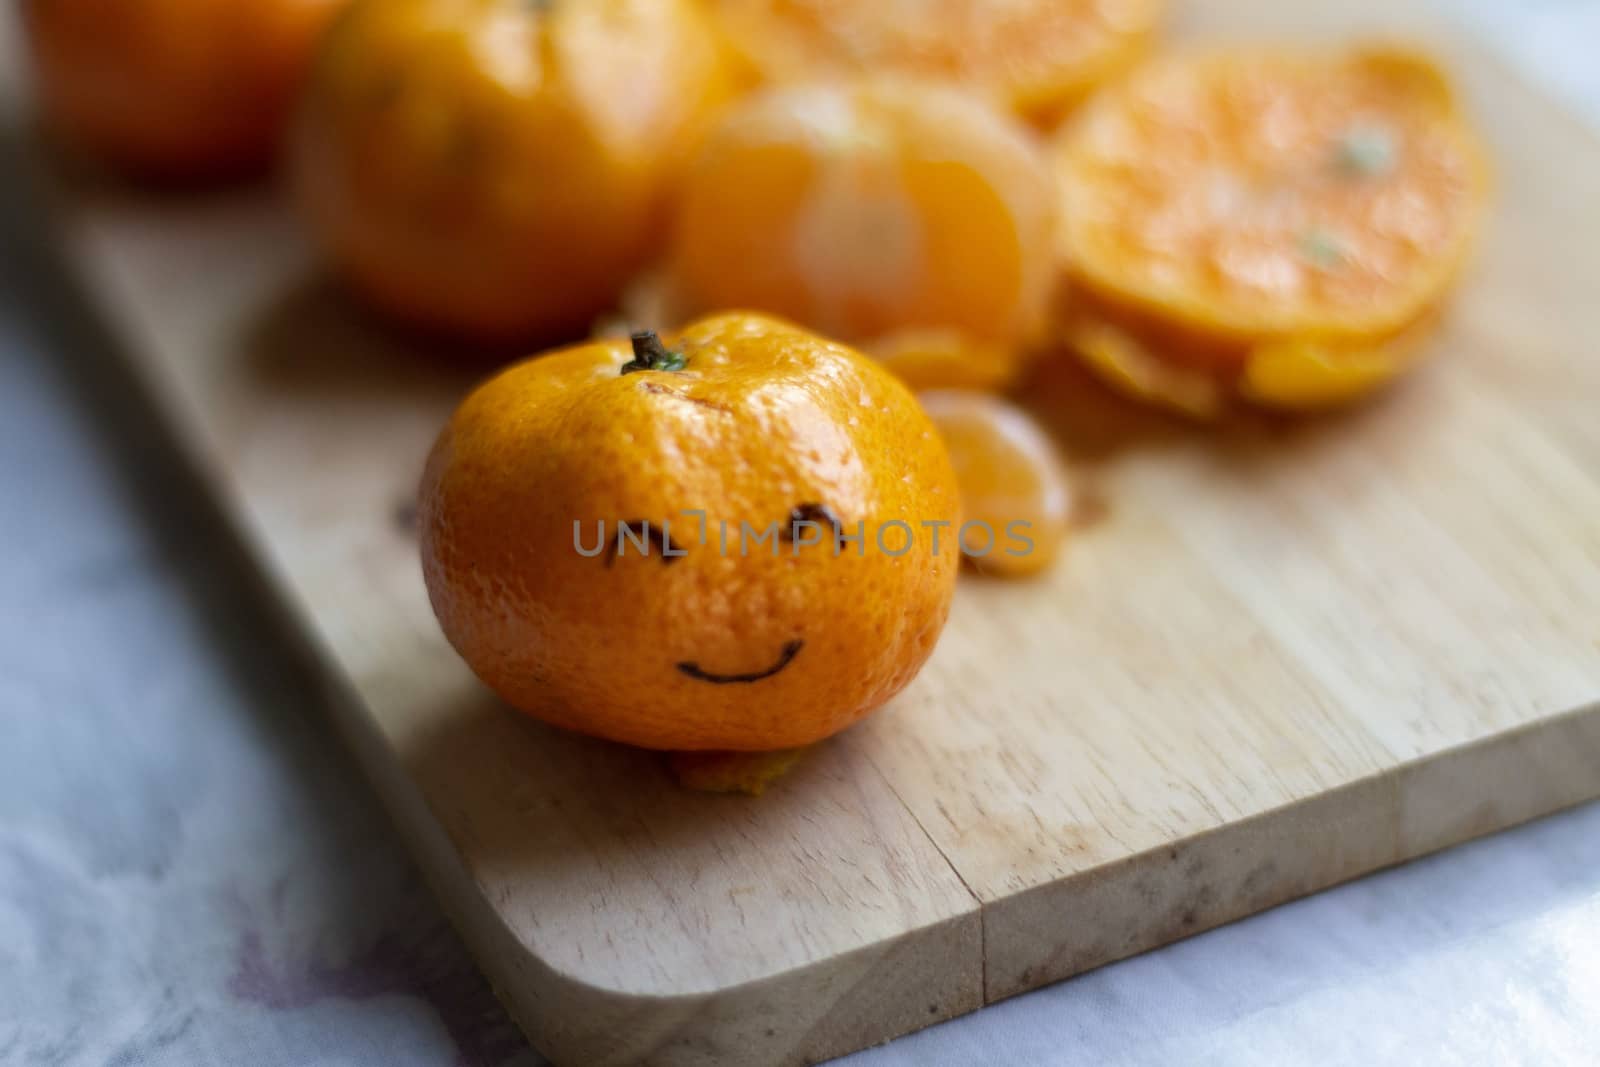 Smiley Face on a Clementine Orange by Sonnet15